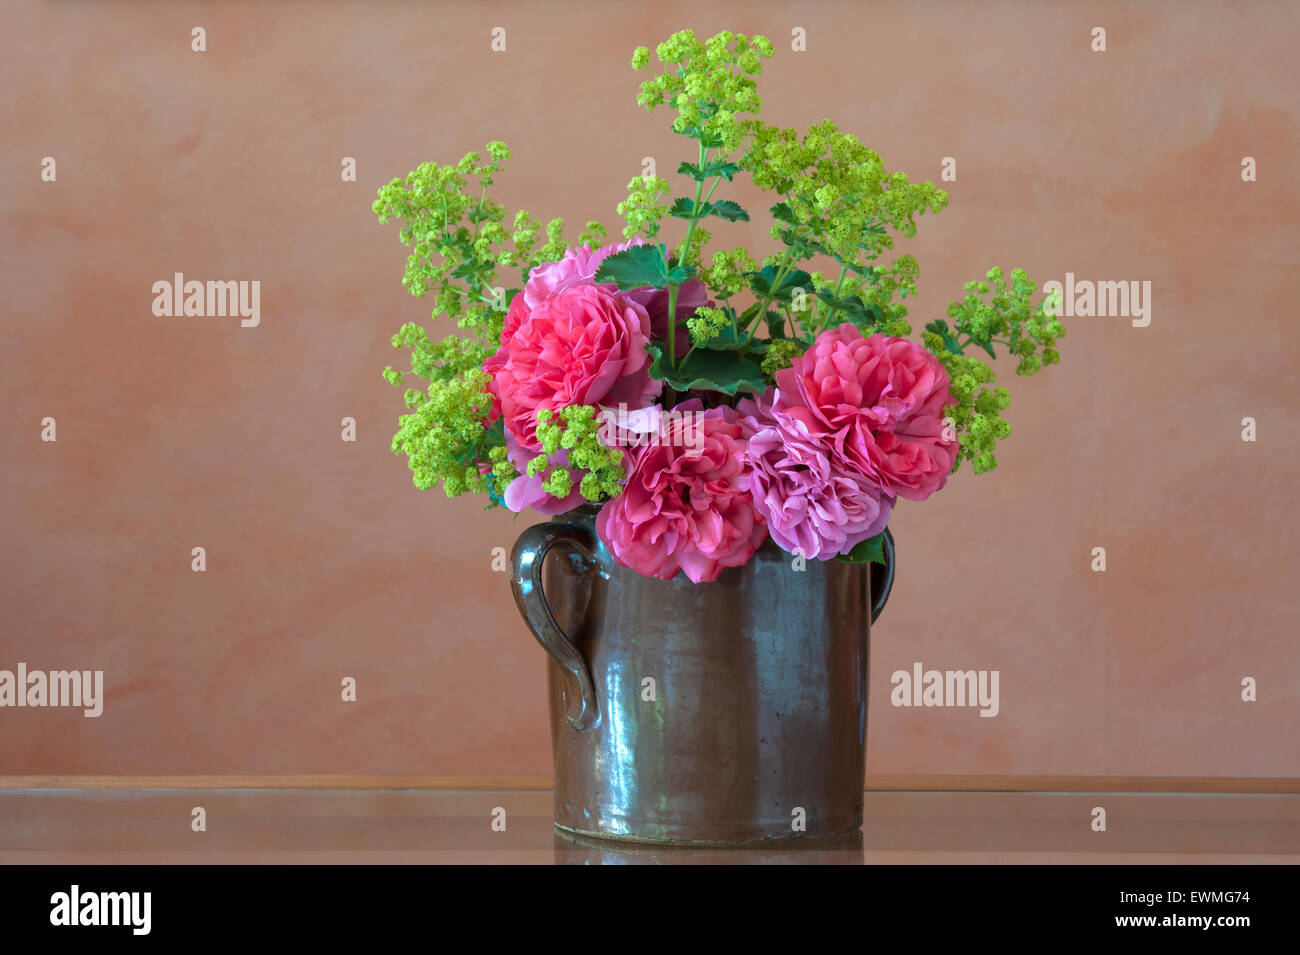 Bouquet in clay jug on table, 'Cariona' rose and lady's mantle (Alchemilla sp.) Stock Photo